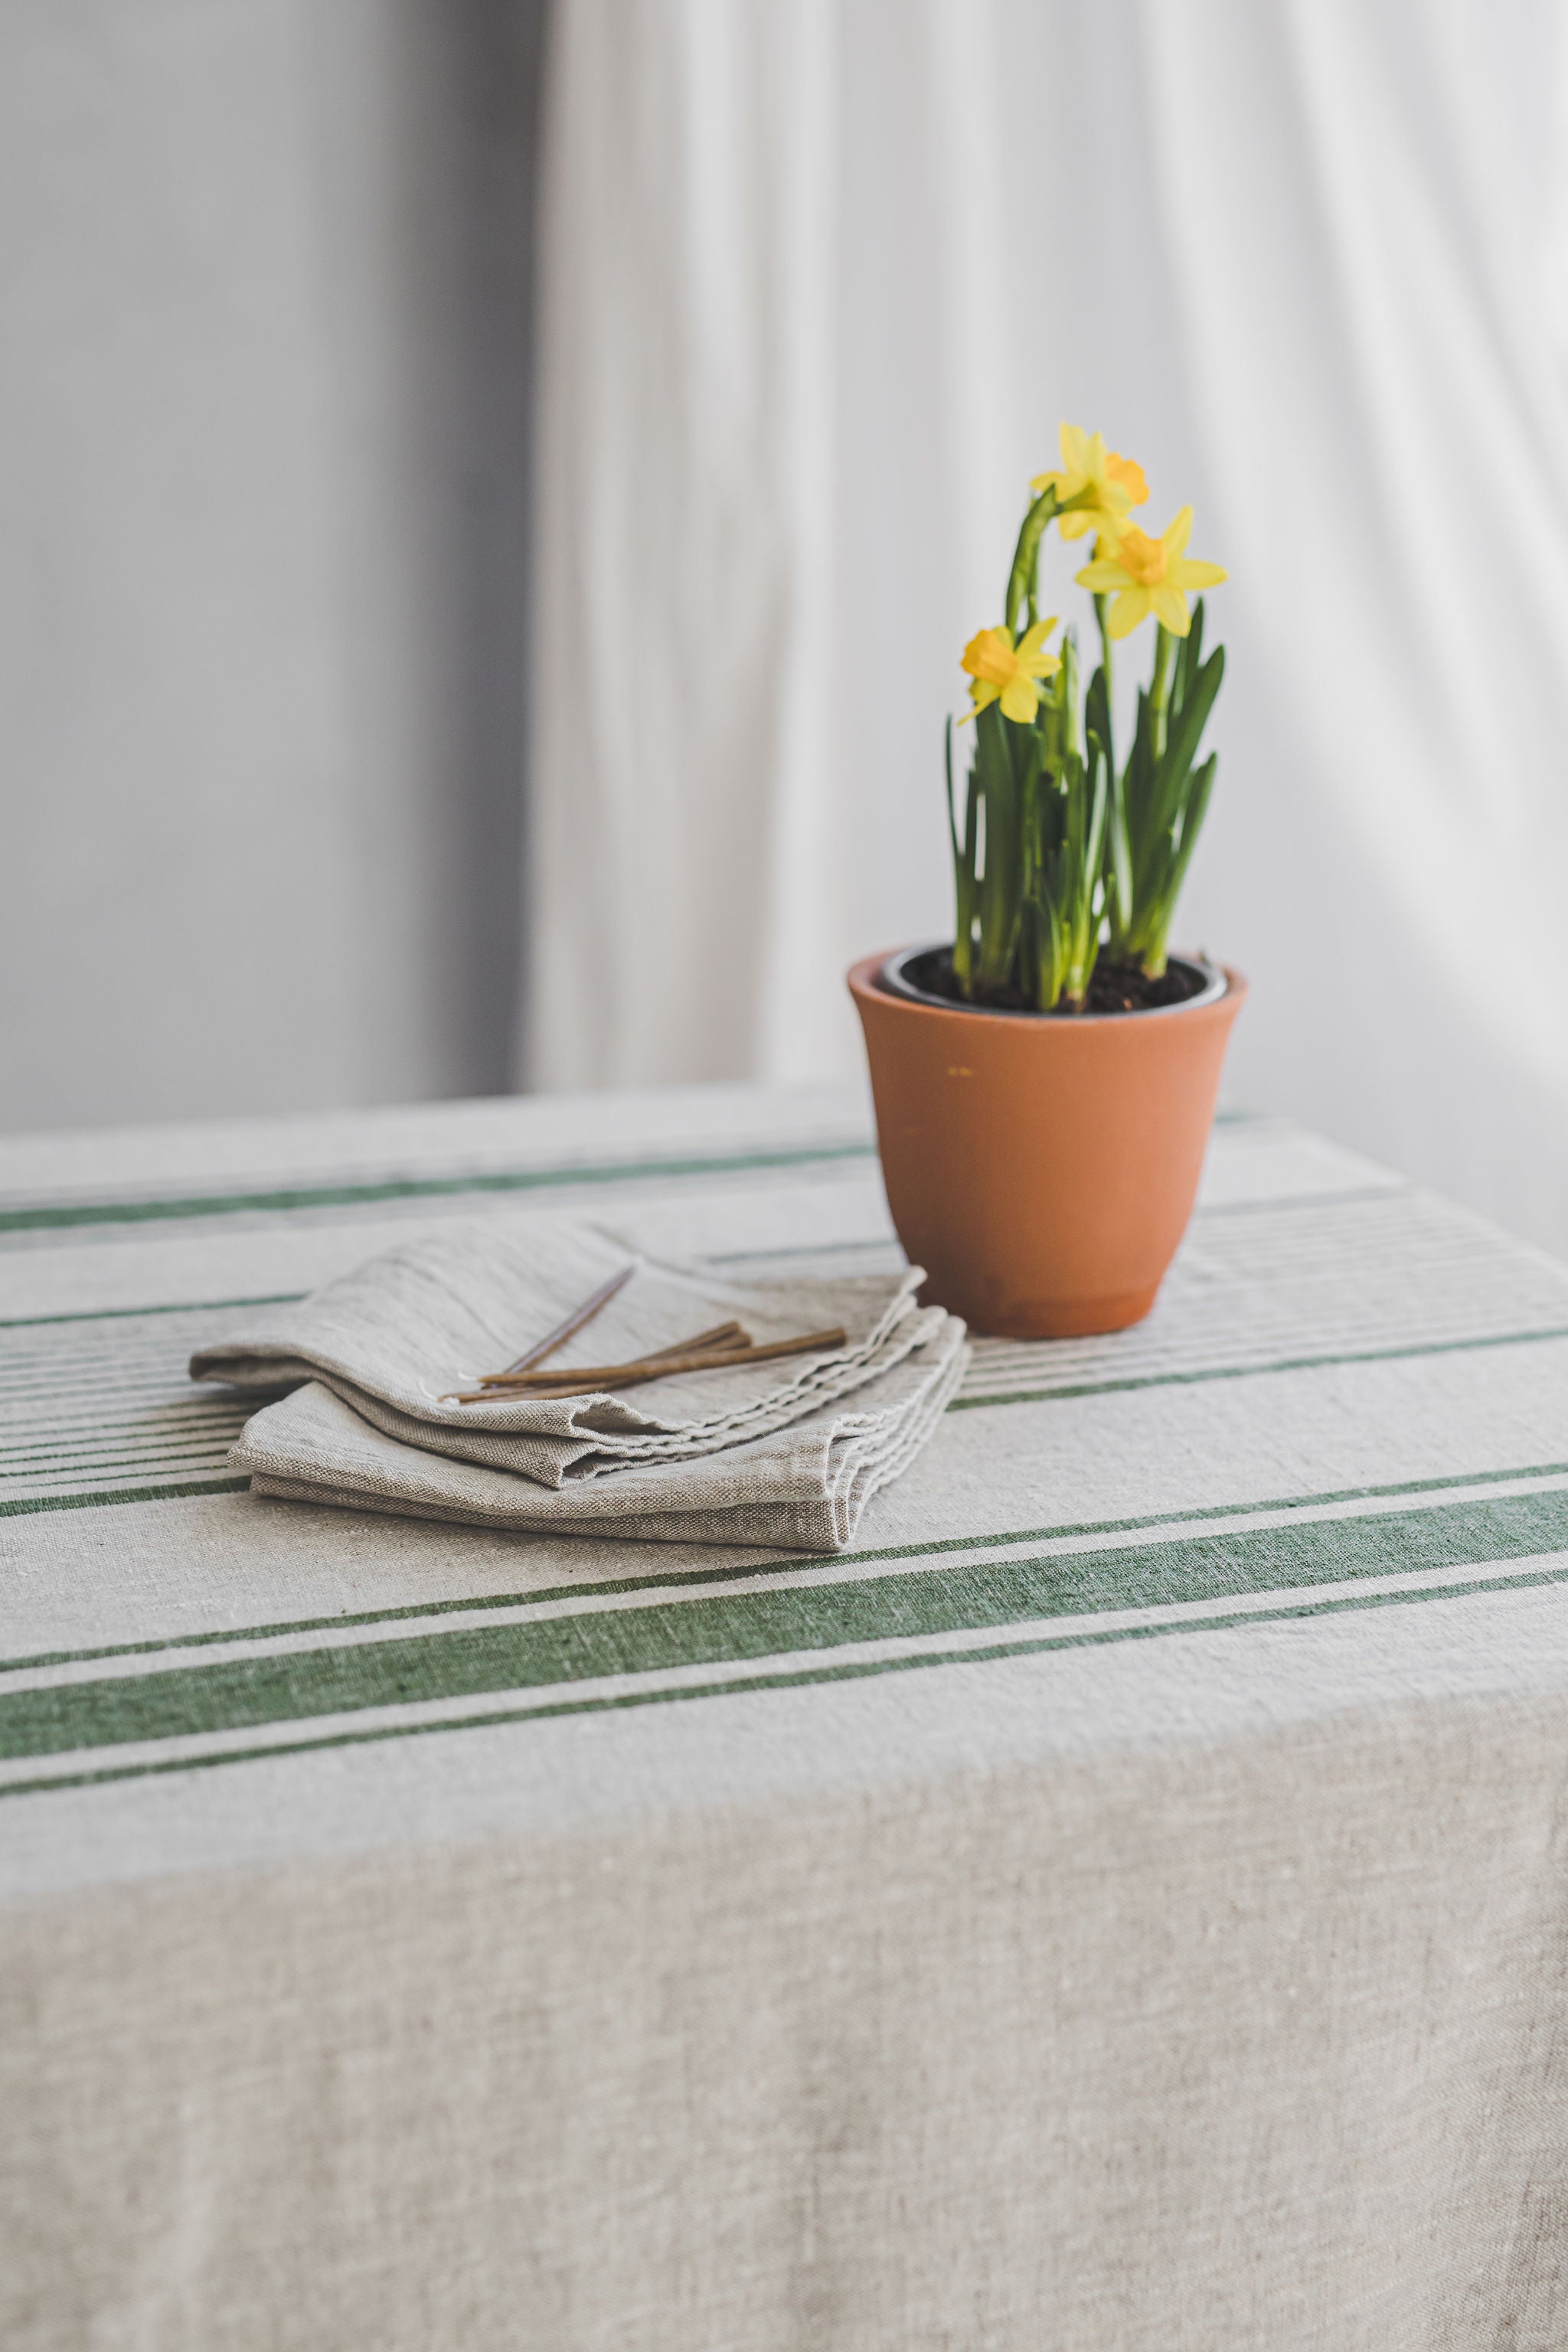 French style linen tablecloth with green stripes